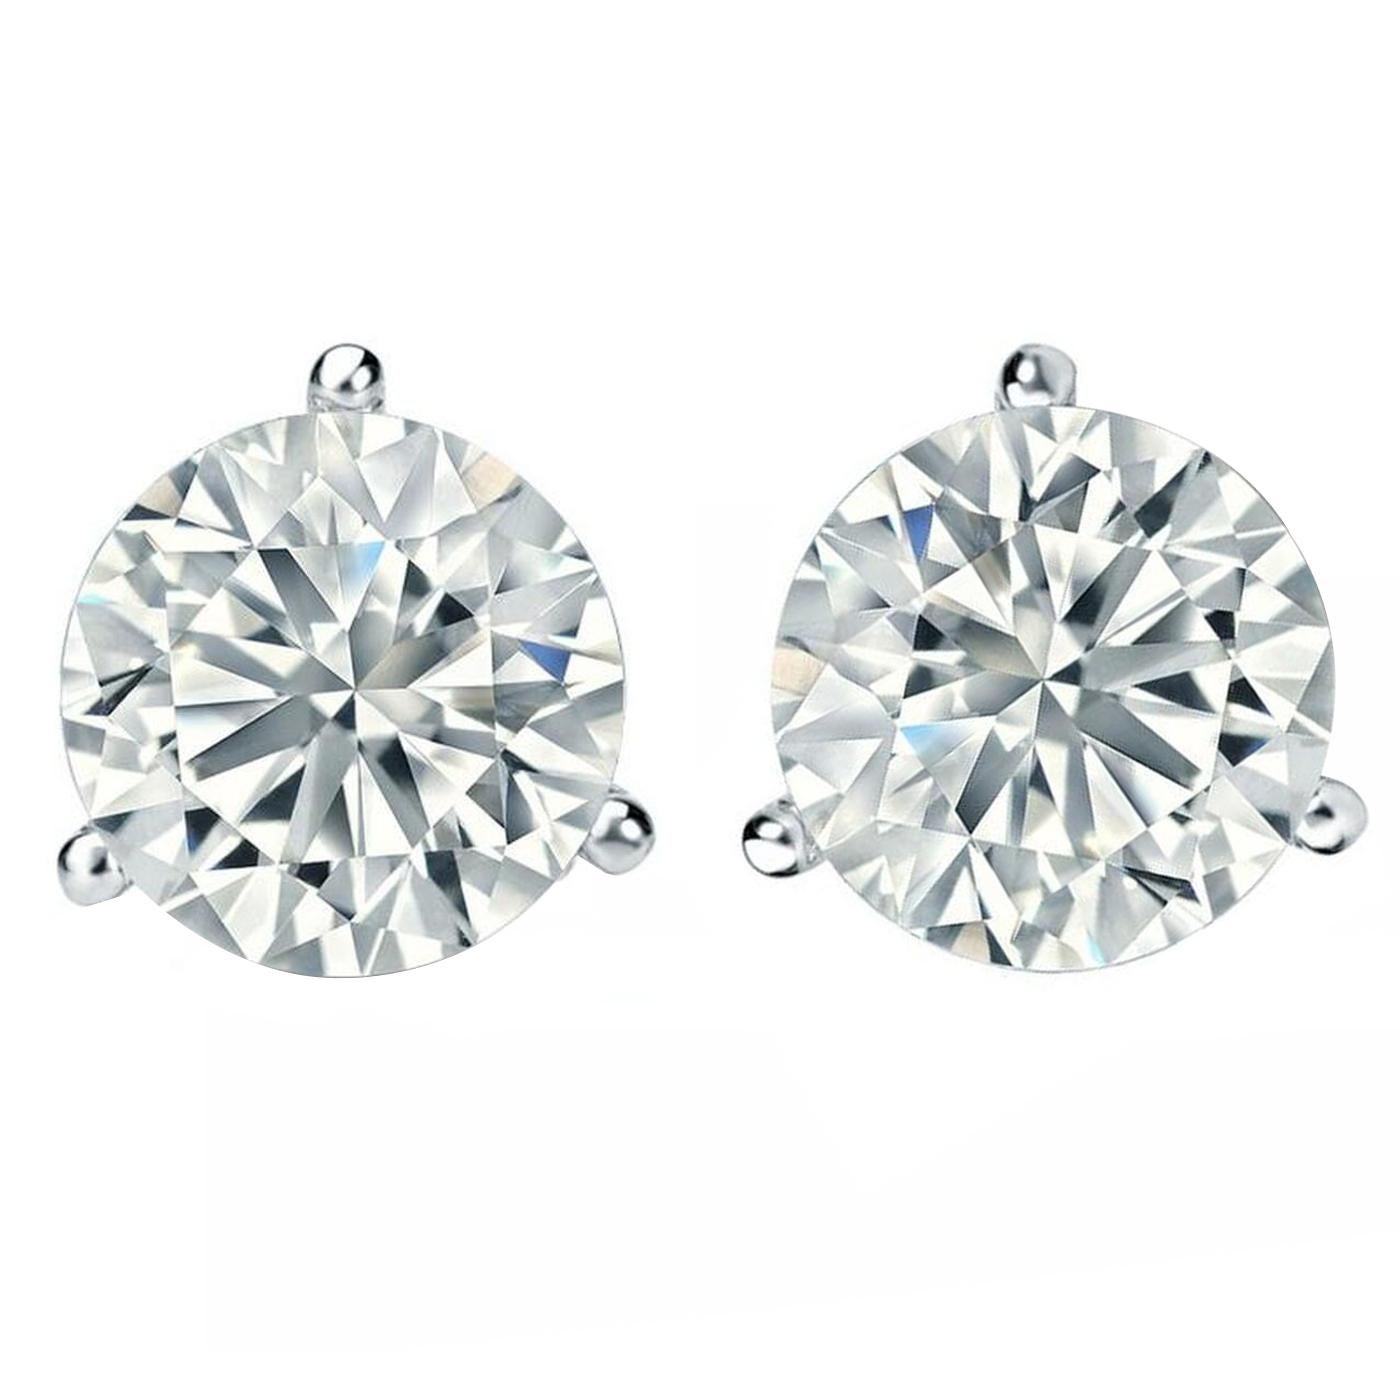 A classic diamond earring featuring 2 Carats diamonds set in a 14k white gold 3-prong Martini Setting. The Diamond Earrings offer a refined and elegant design, adding sparkle and elegance to your look. These diamond earrings can be worn